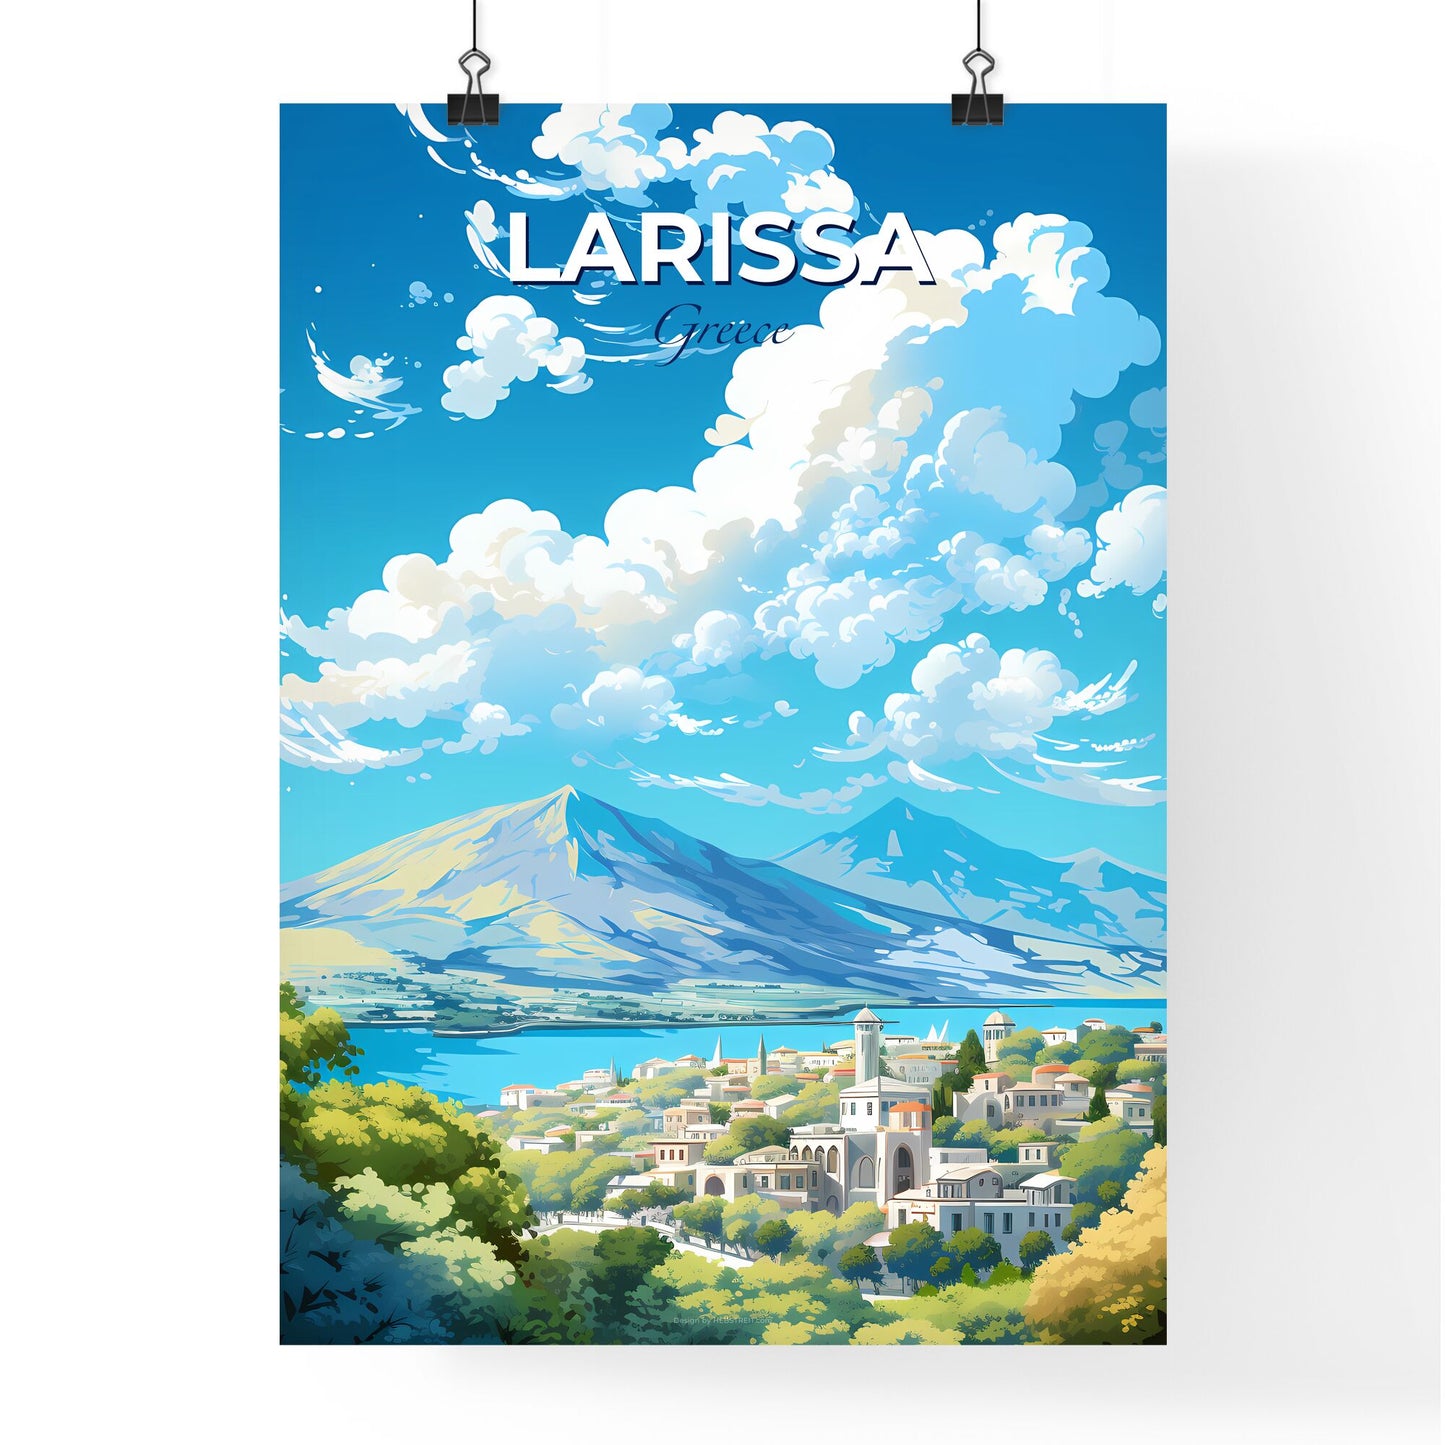 Larissa Greece Skyline - A Landscape Of A Town With A Mountain In The Background - Customizable Travel Gift Default Title